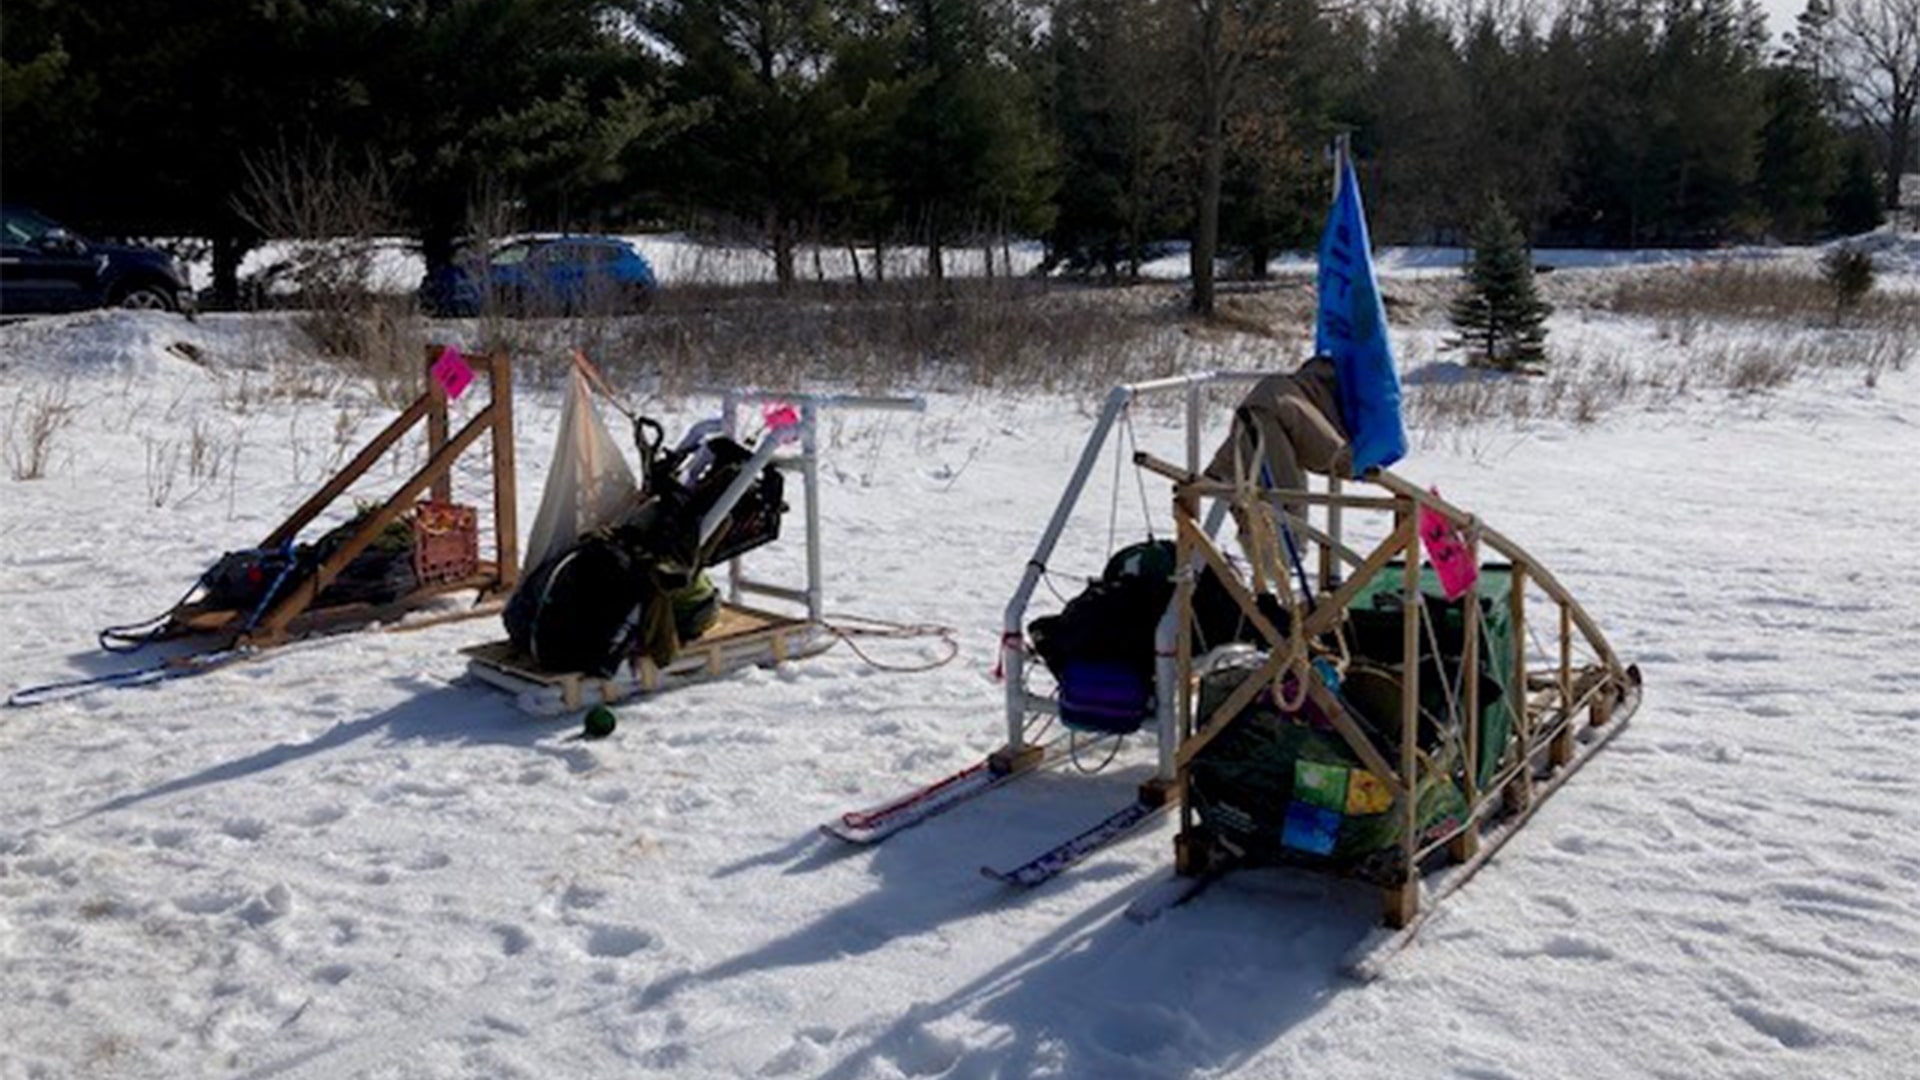 Four sleds of gear are packed and sitting on the snow while the Scouts are off doing an activity